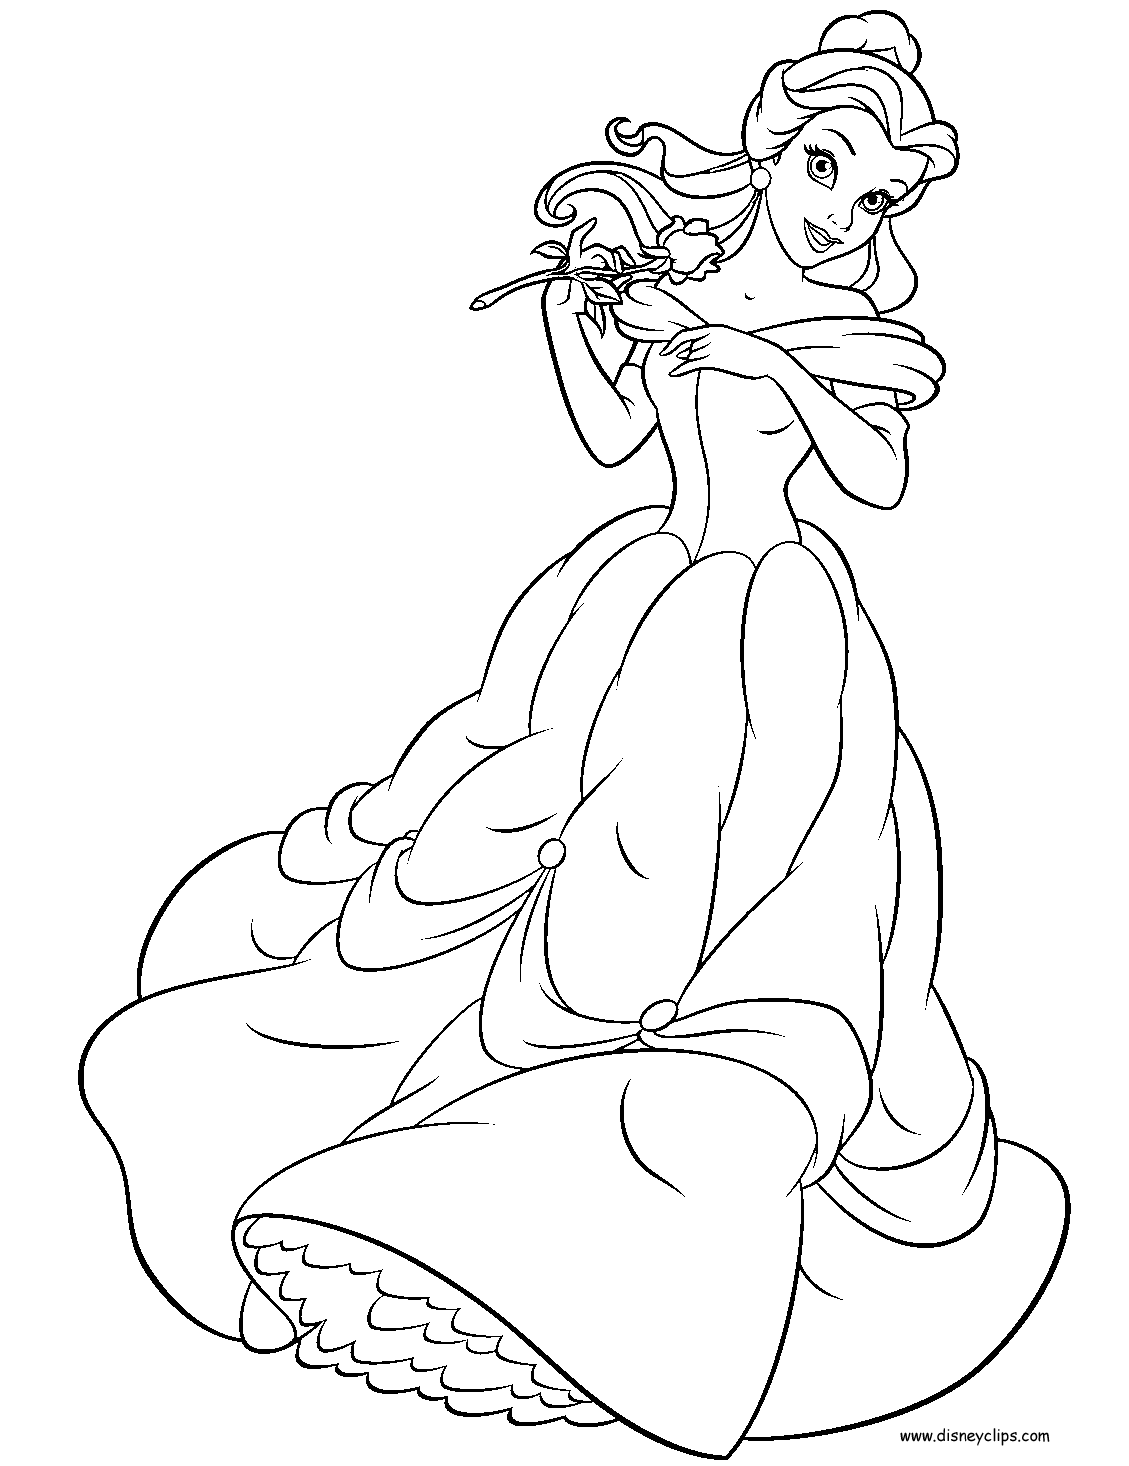 belle pictures to color princess belle coloring pages to download and print for free color to pictures belle 1 1